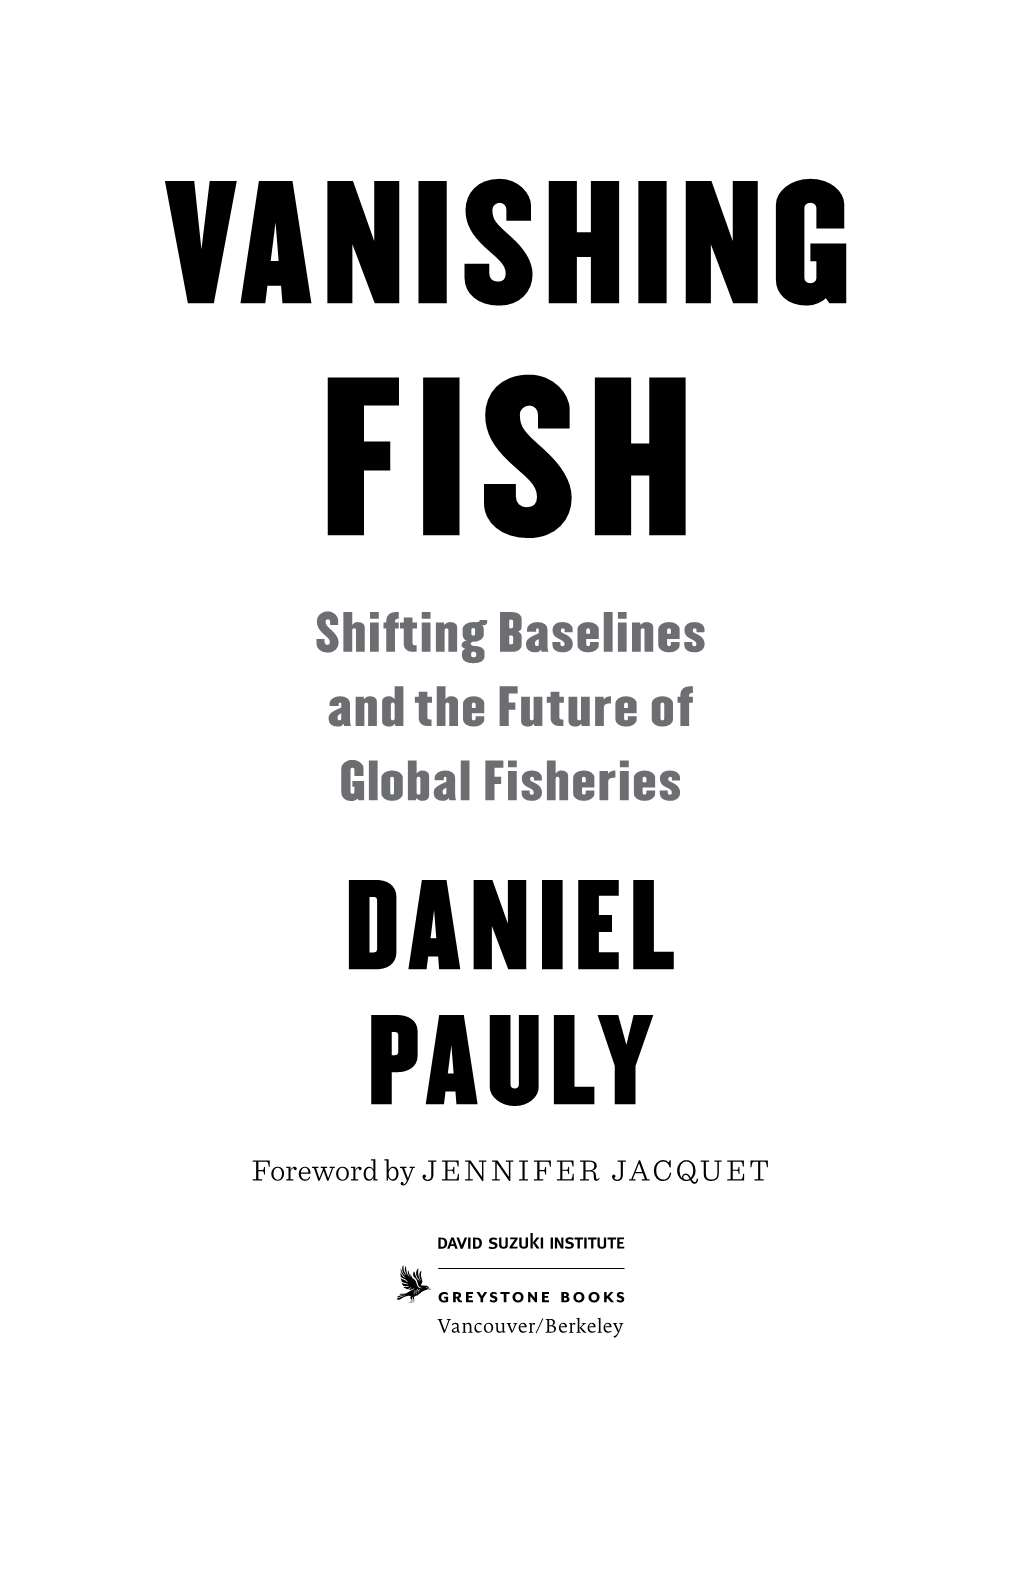 VANISHING FISH Shifting Baselines and the Future of Global Fisheries DANIEL PAULY Foreword by JENNIFER JACQUET